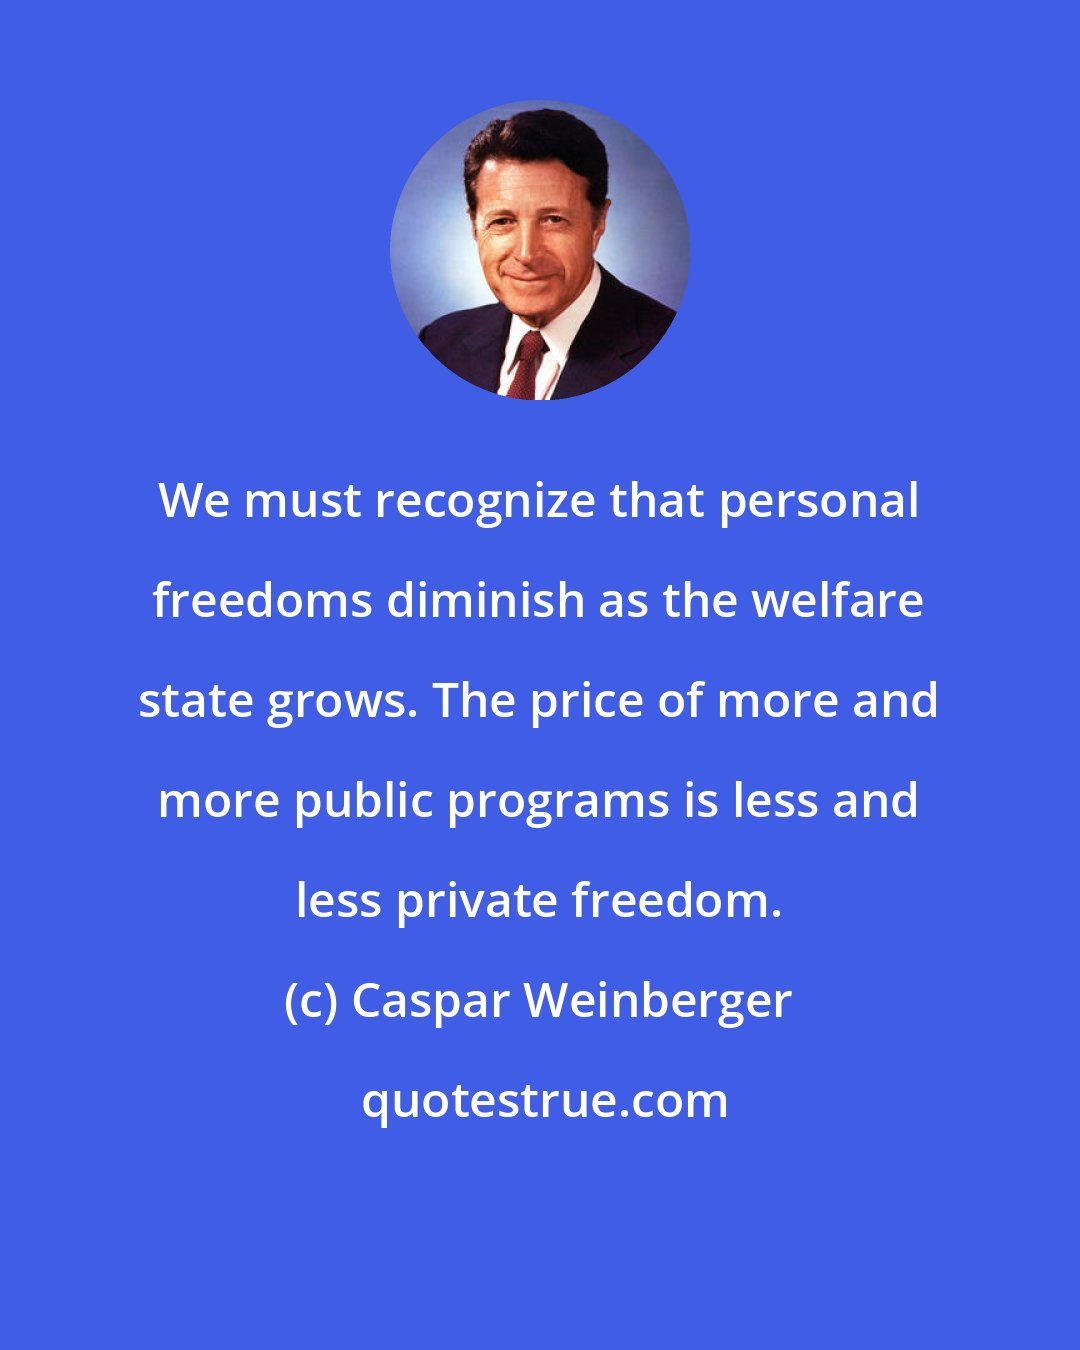 Caspar Weinberger: We must recognize that personal freedoms diminish as the welfare state grows. The price of more and more public programs is less and less private freedom.